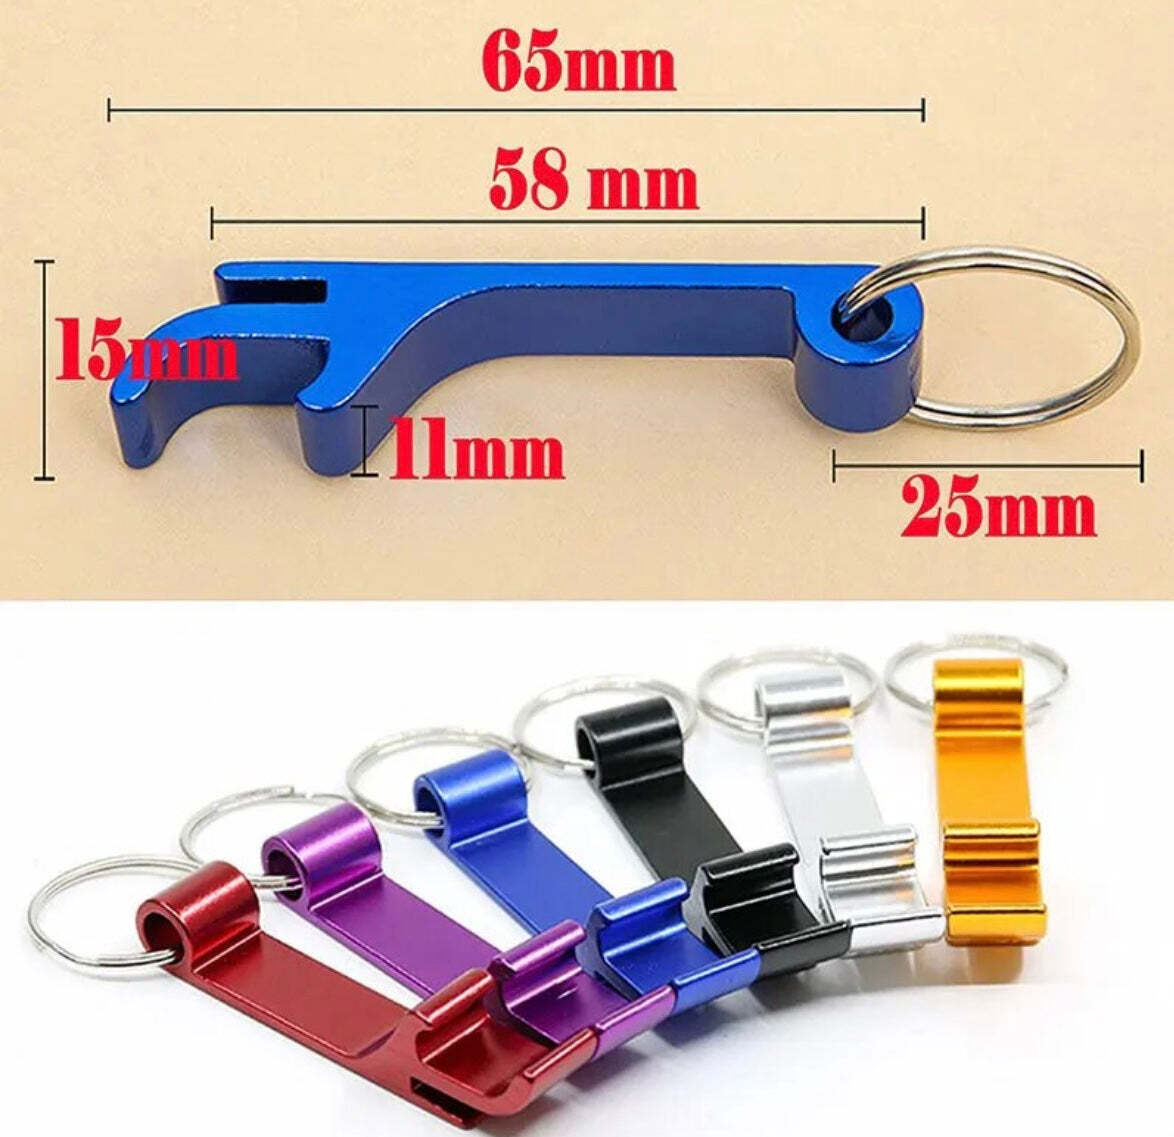 1 pc Multi-use Bottle and Soda Can opener keychain